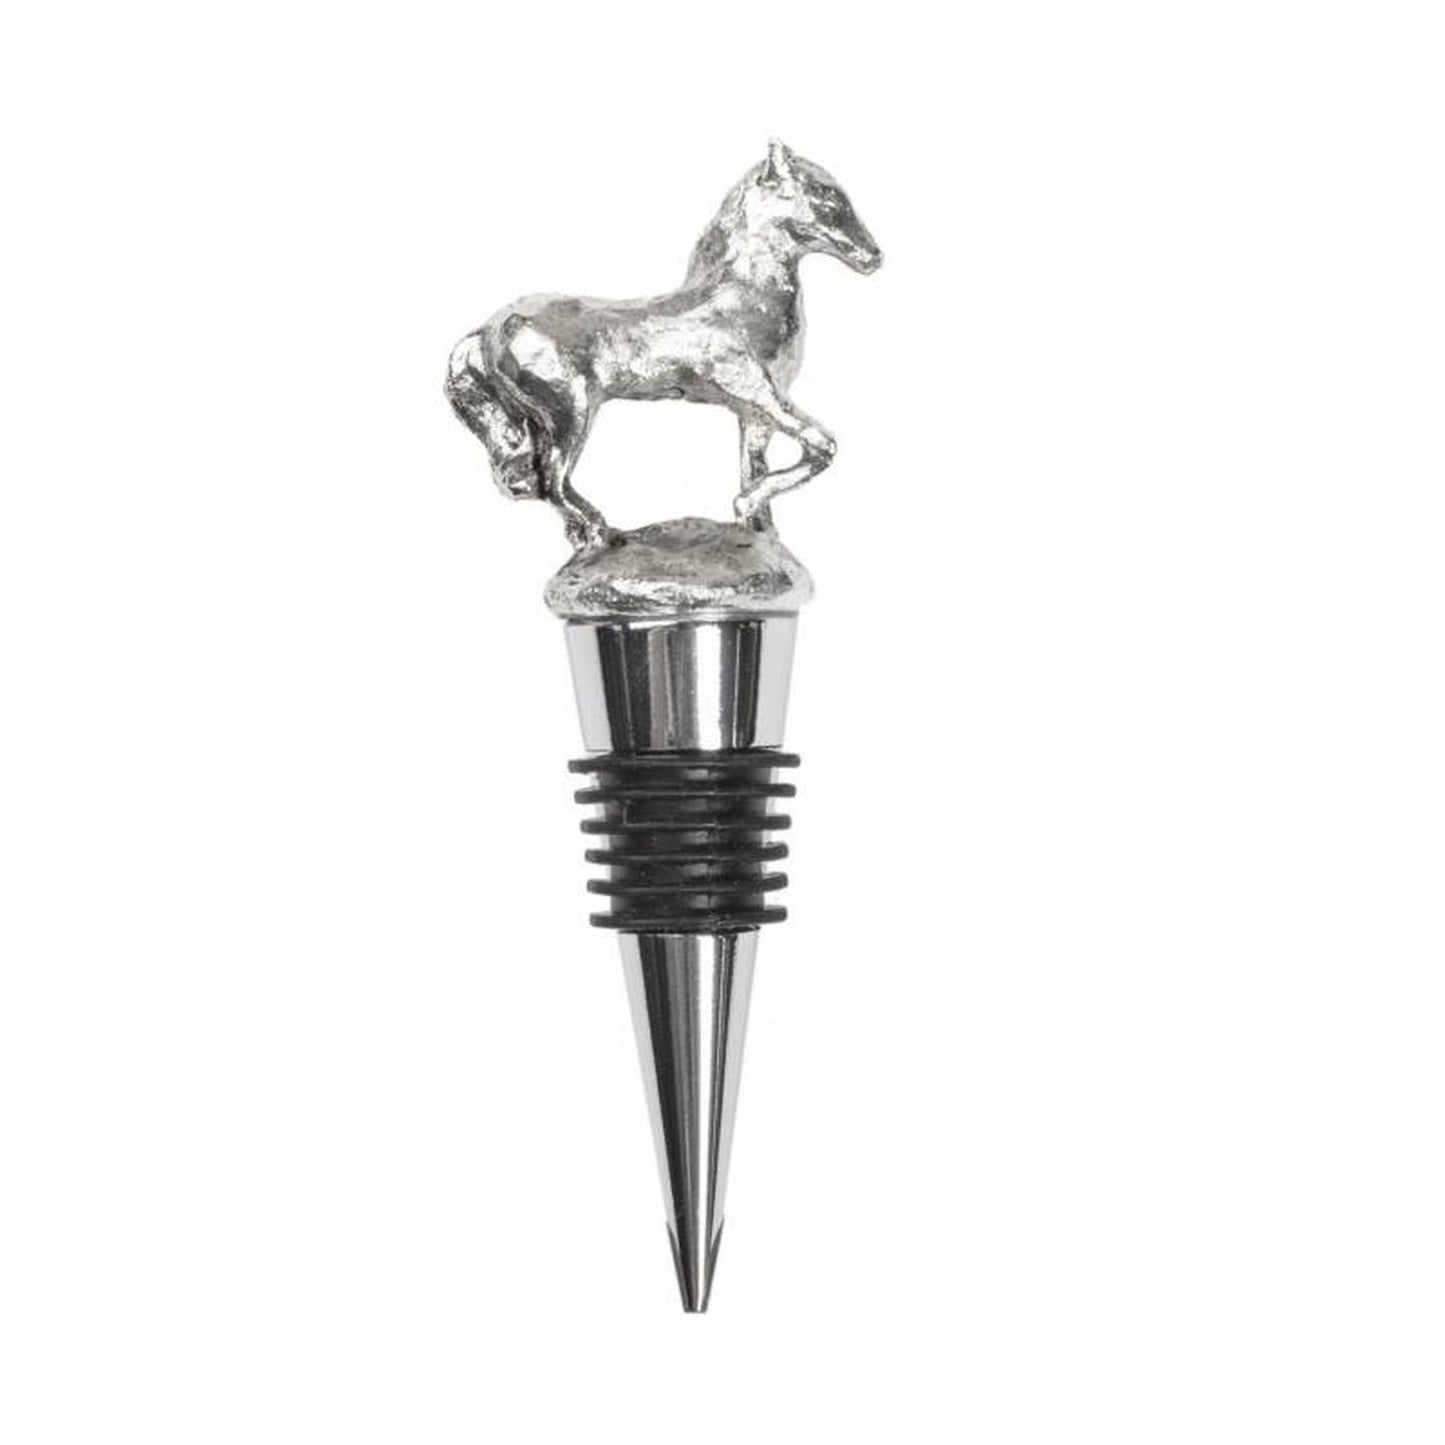 Quest Collection Horse Wine Stopper